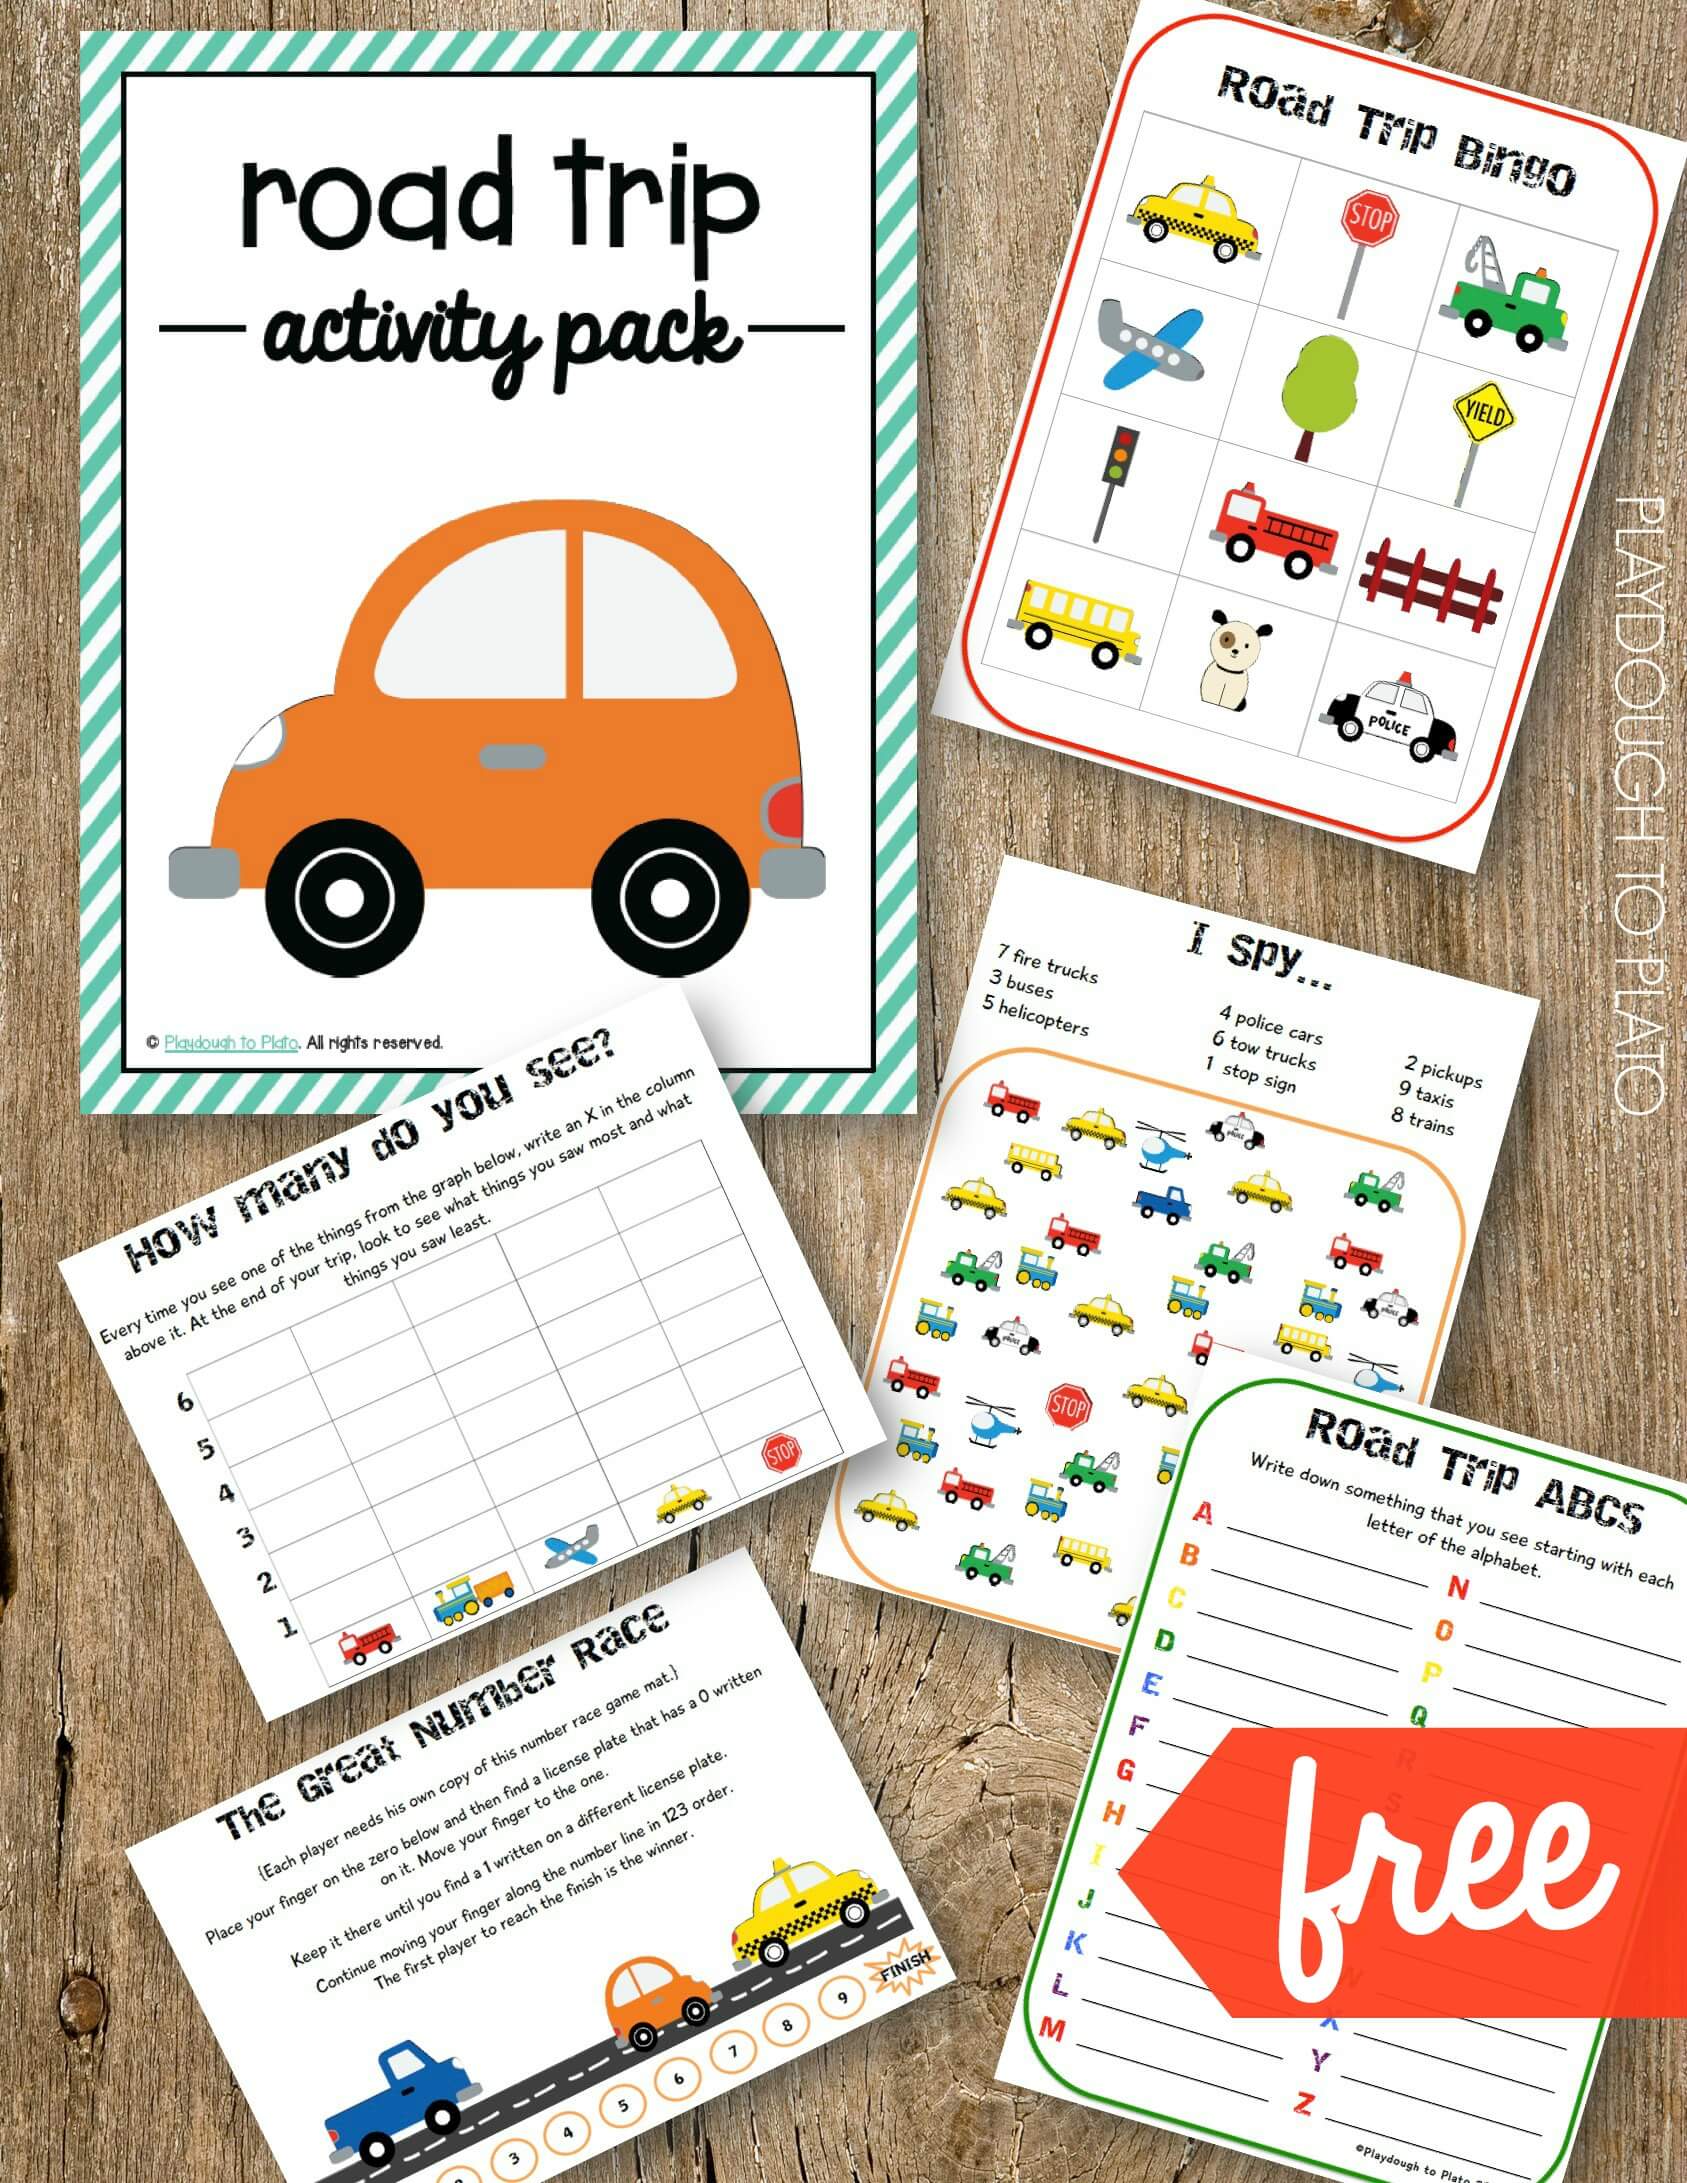 Learn with Play at Home: Road-trip activities and games for kids